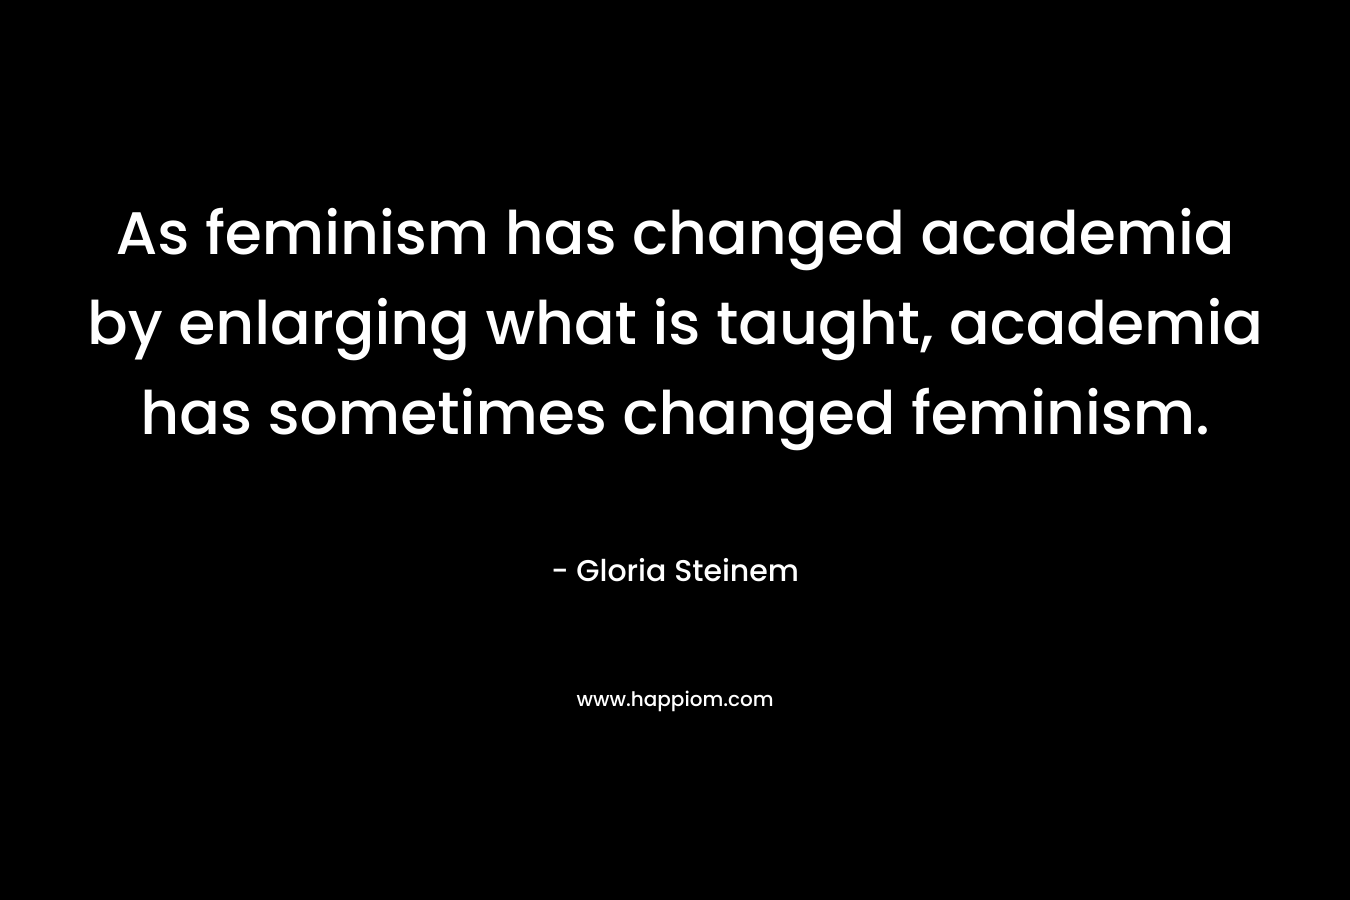 As feminism has changed academia by enlarging what is taught, academia has sometimes changed feminism.